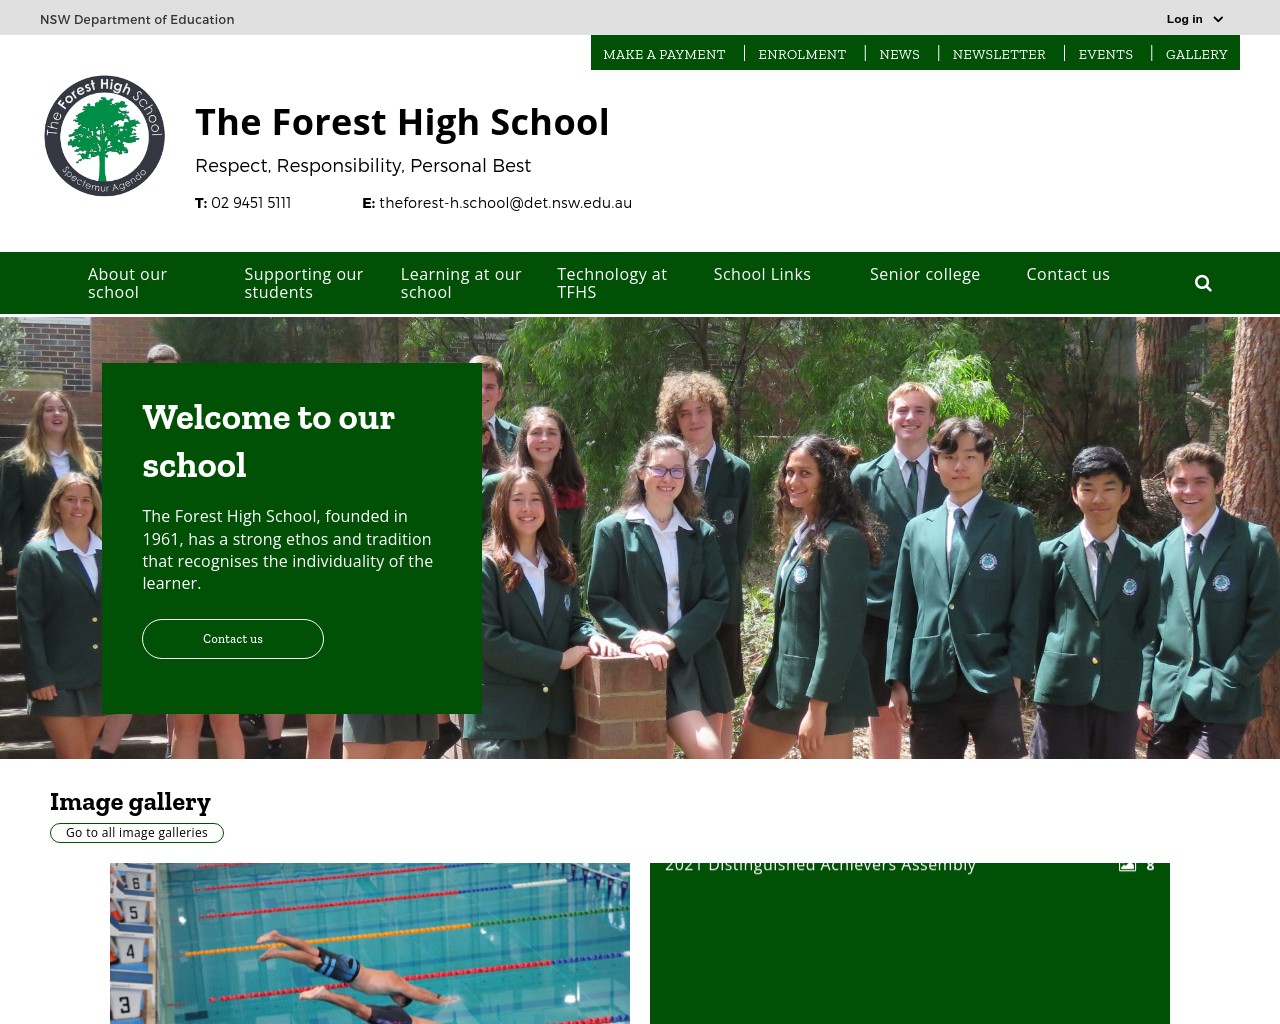 The Forest High School